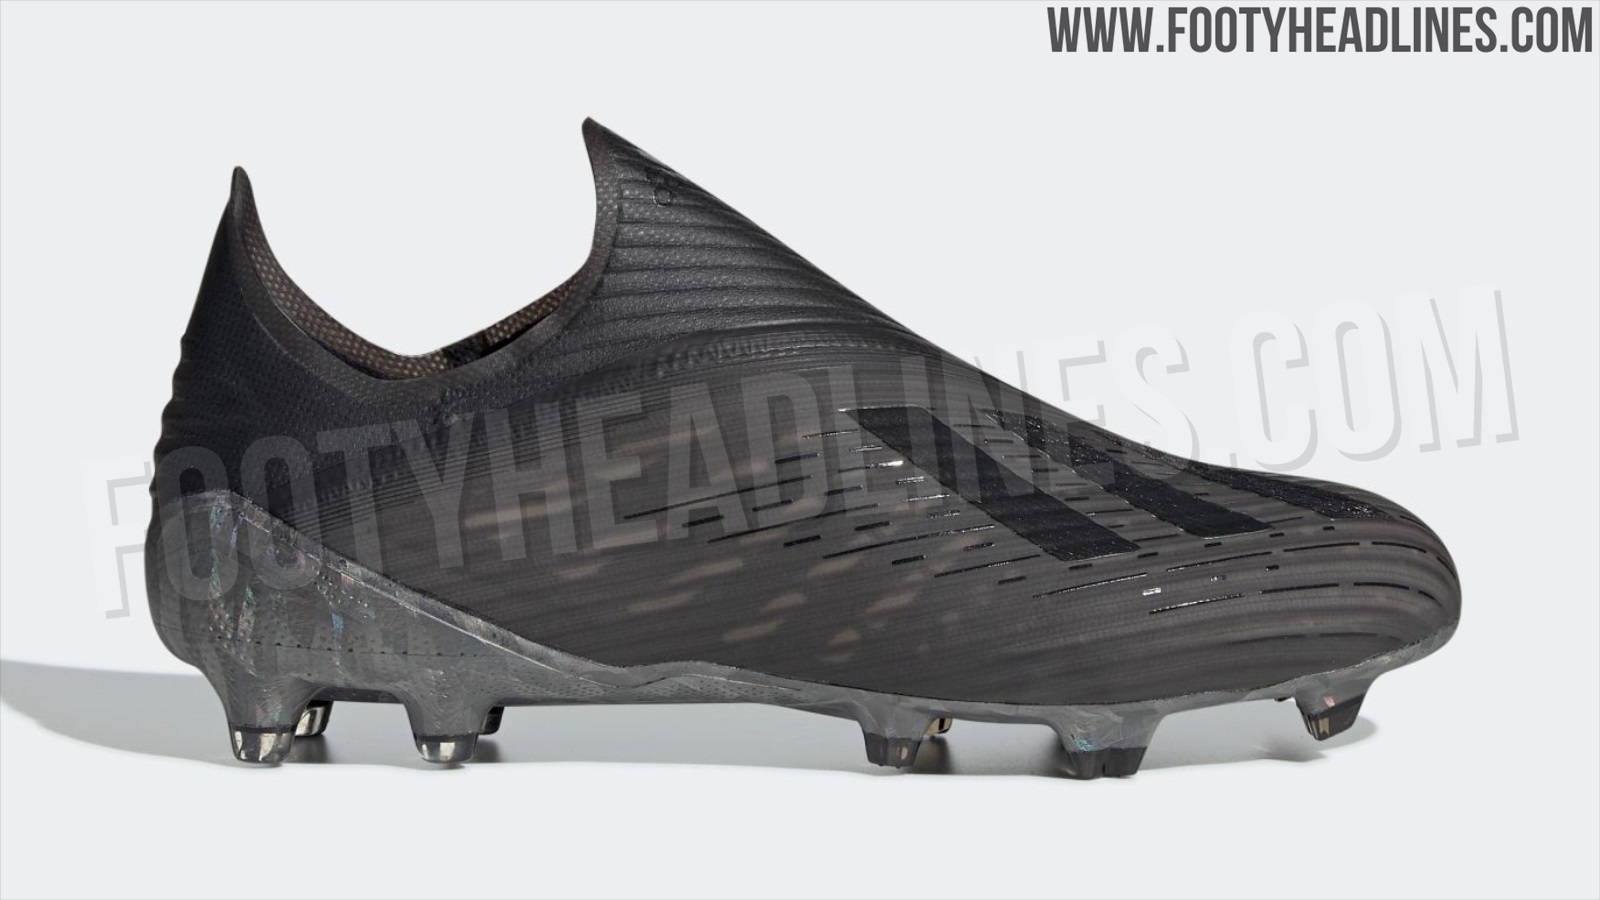 Blackout Adidas X 19+ 'Dark Script' Pack Boots Leaked - Footy